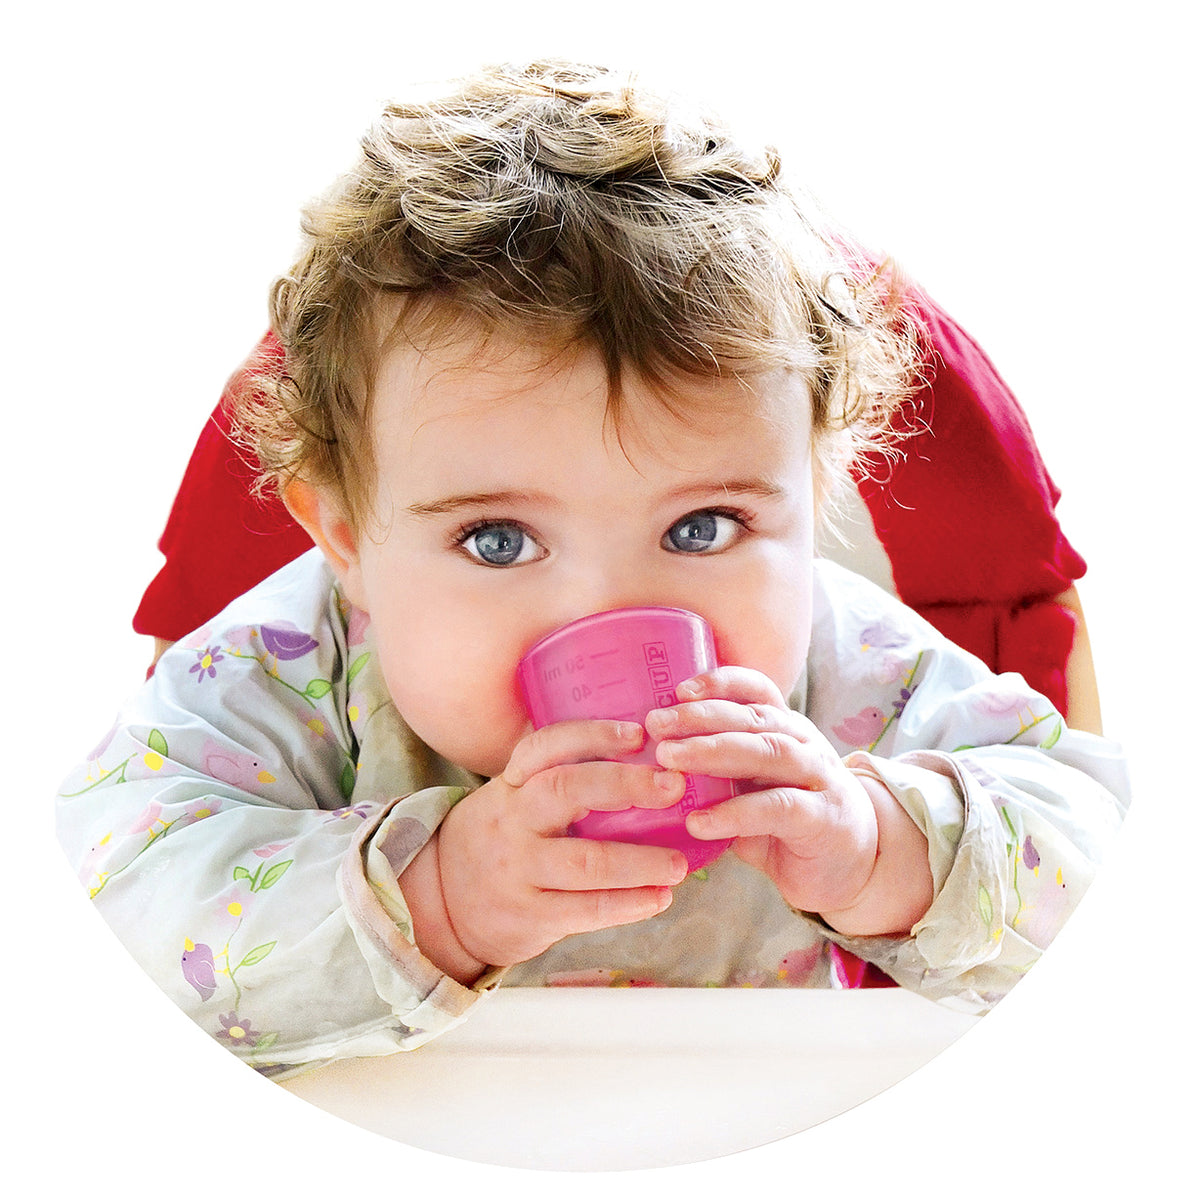 Open Cup Drinking 101: How to teach open cup drinking to your baby